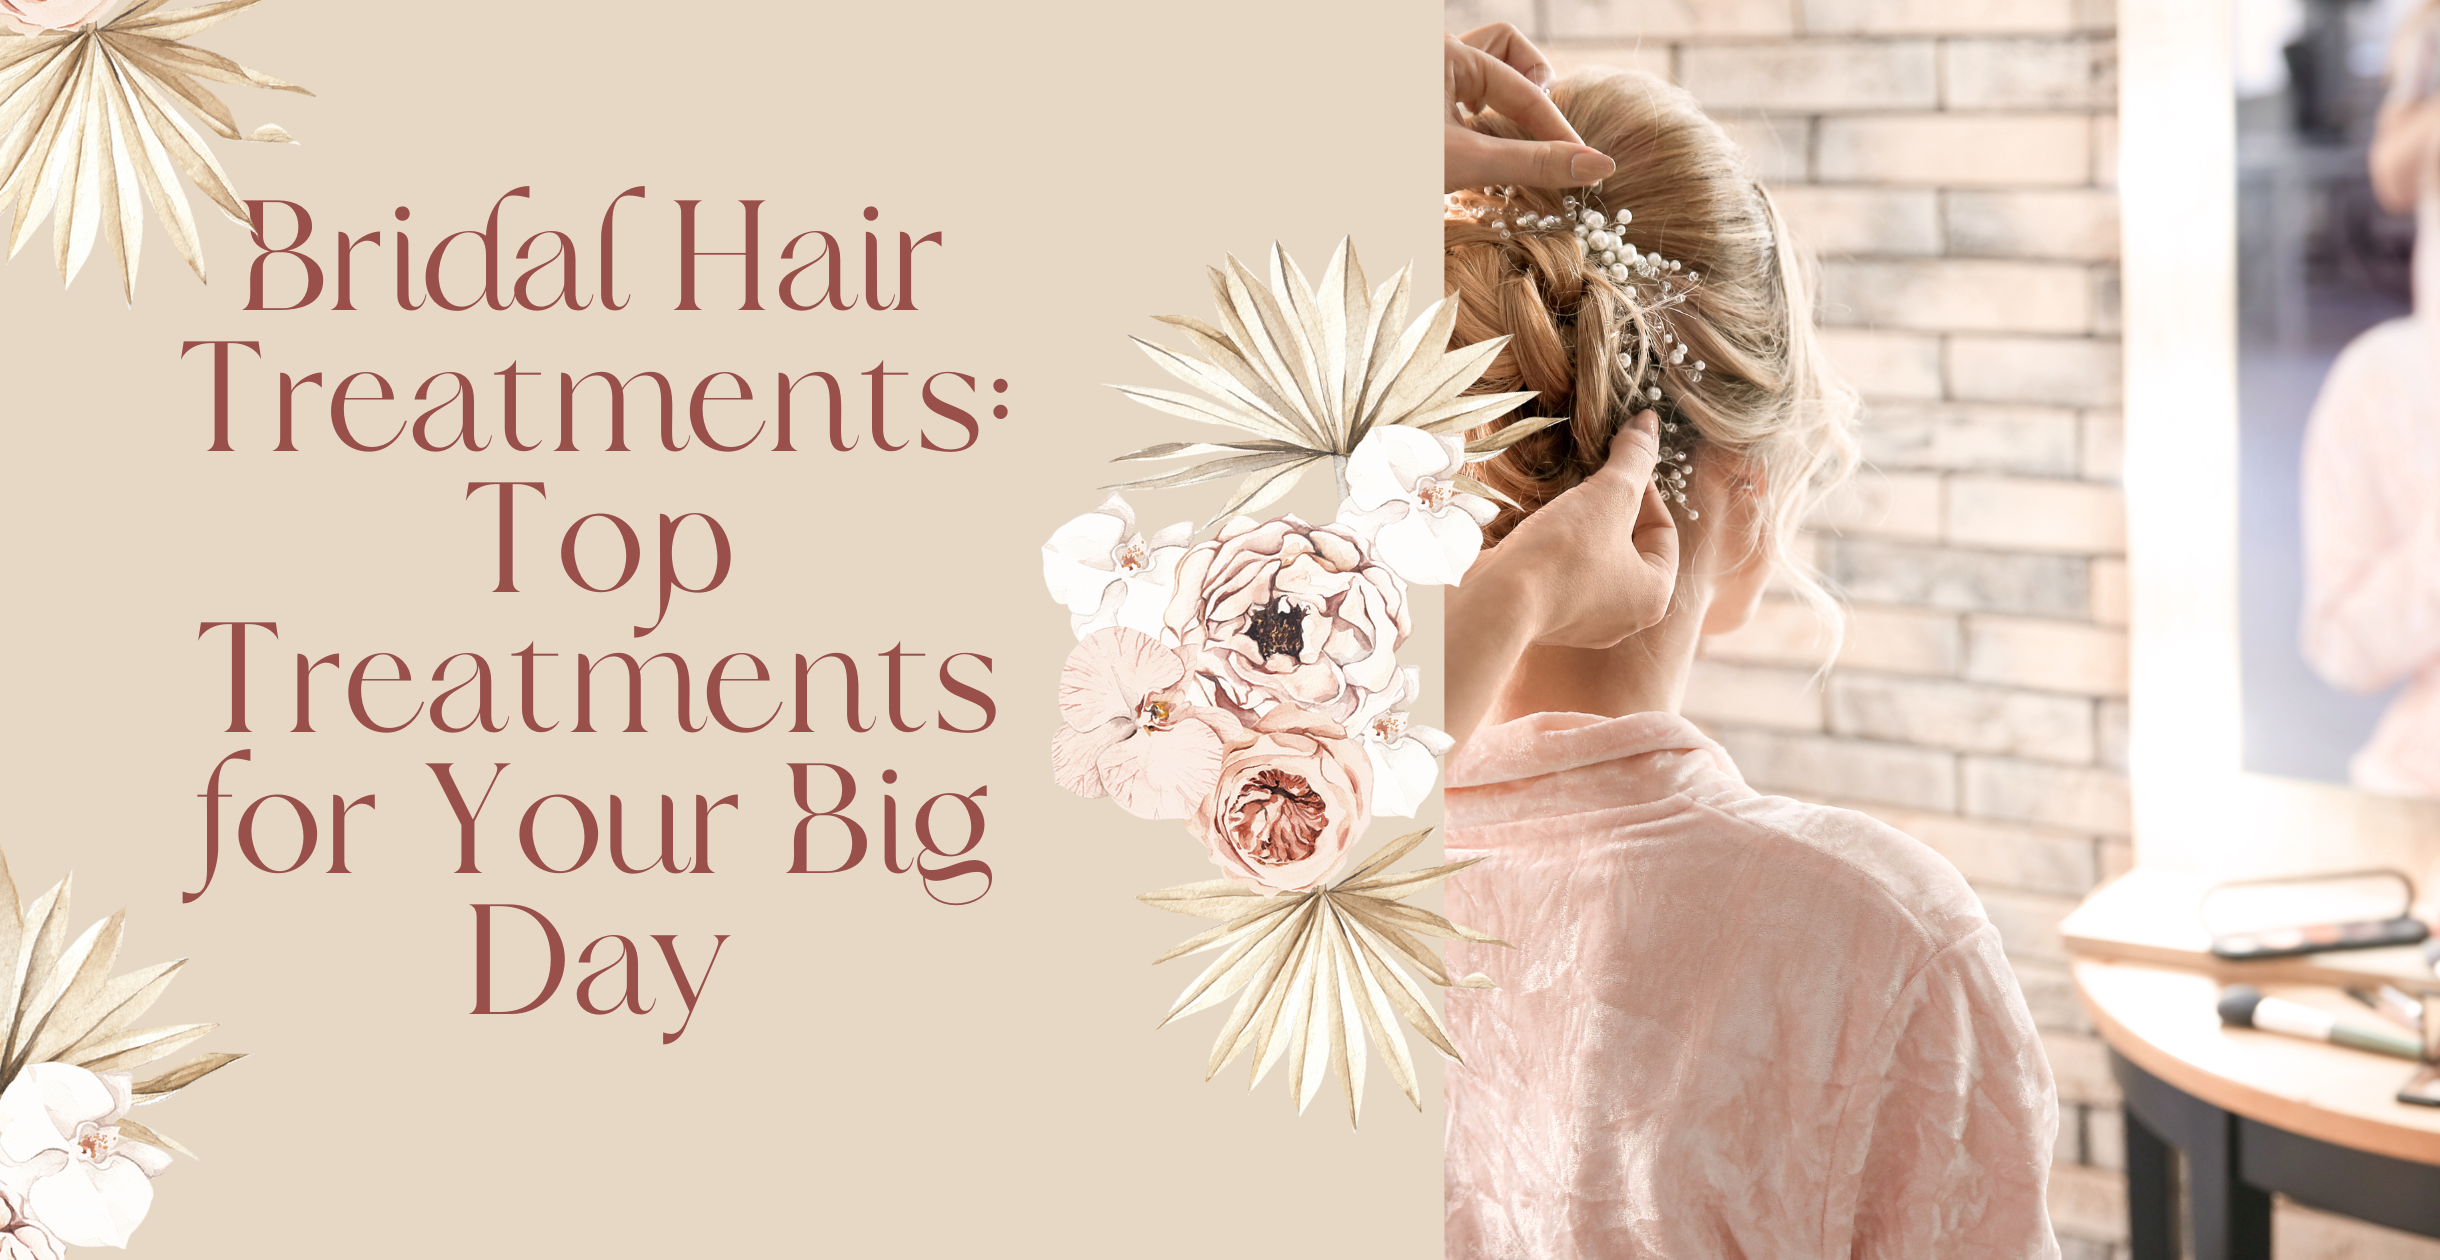 Bridal Hair Treatments: Top Treatments for Your Big Day